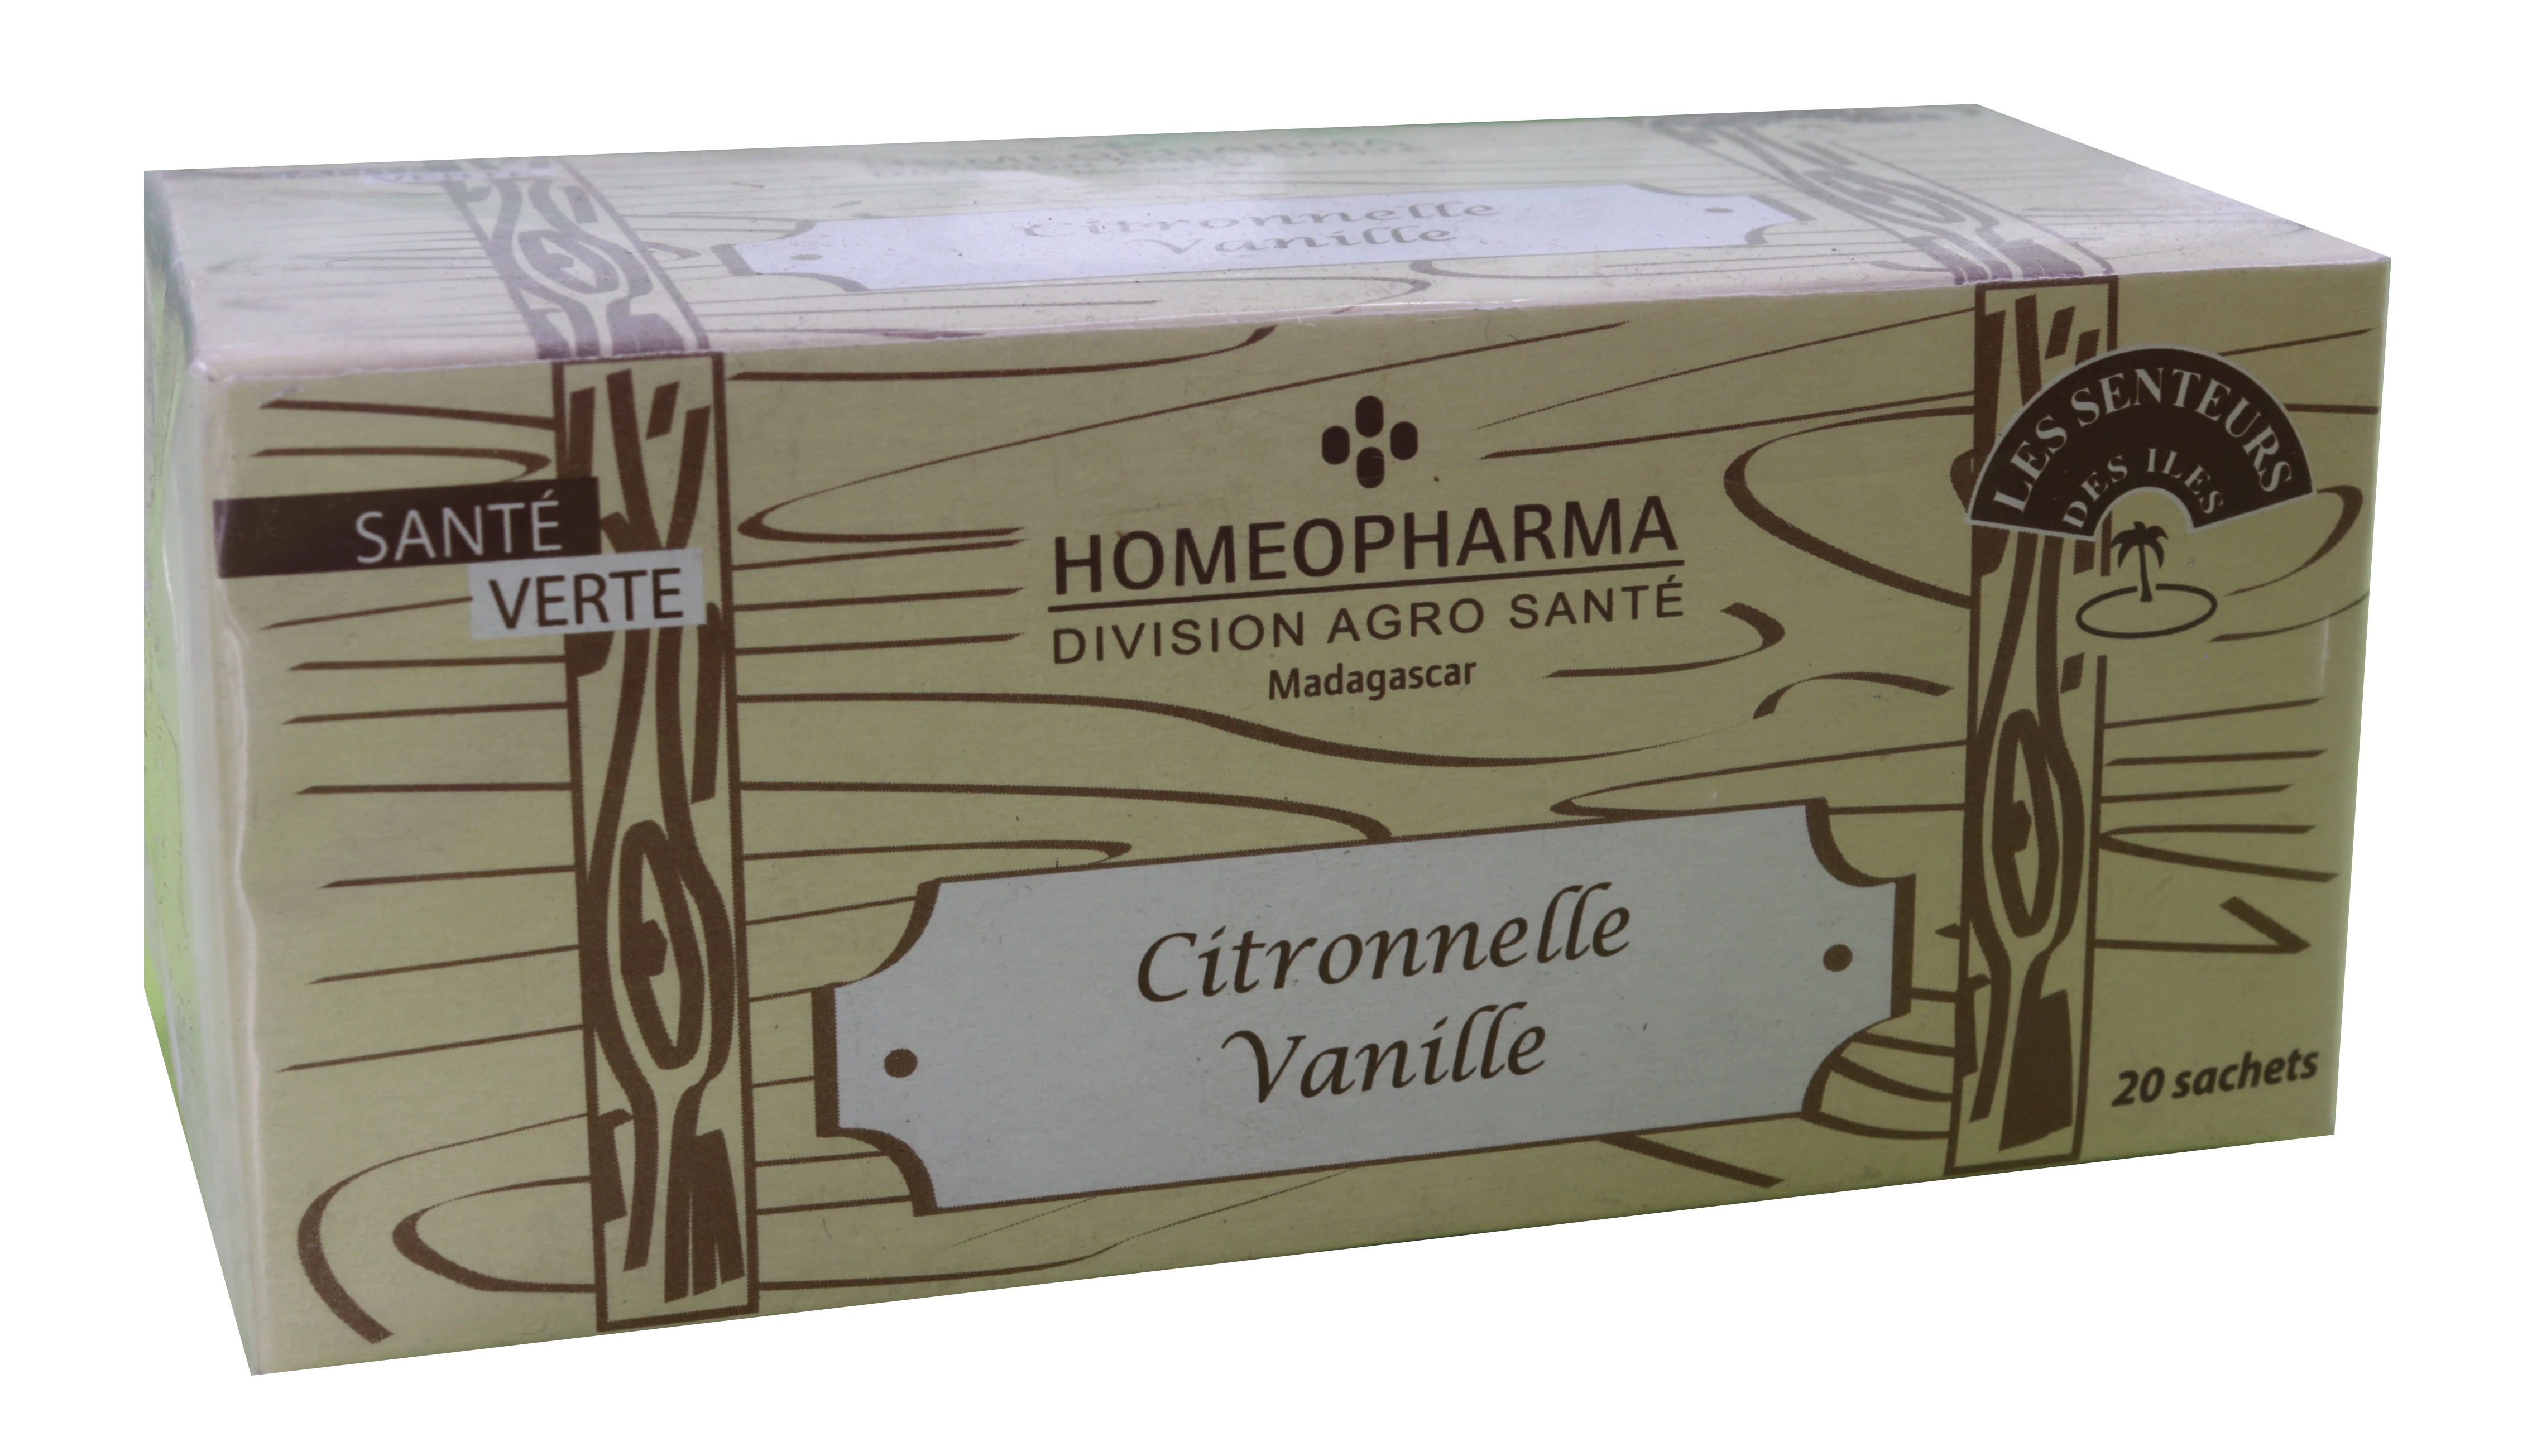 Herbal Teas - Infusions Range Scent Of The Lemongrass-Vanilla Islands Box 20 Infusettes - HOMEOPHARMA